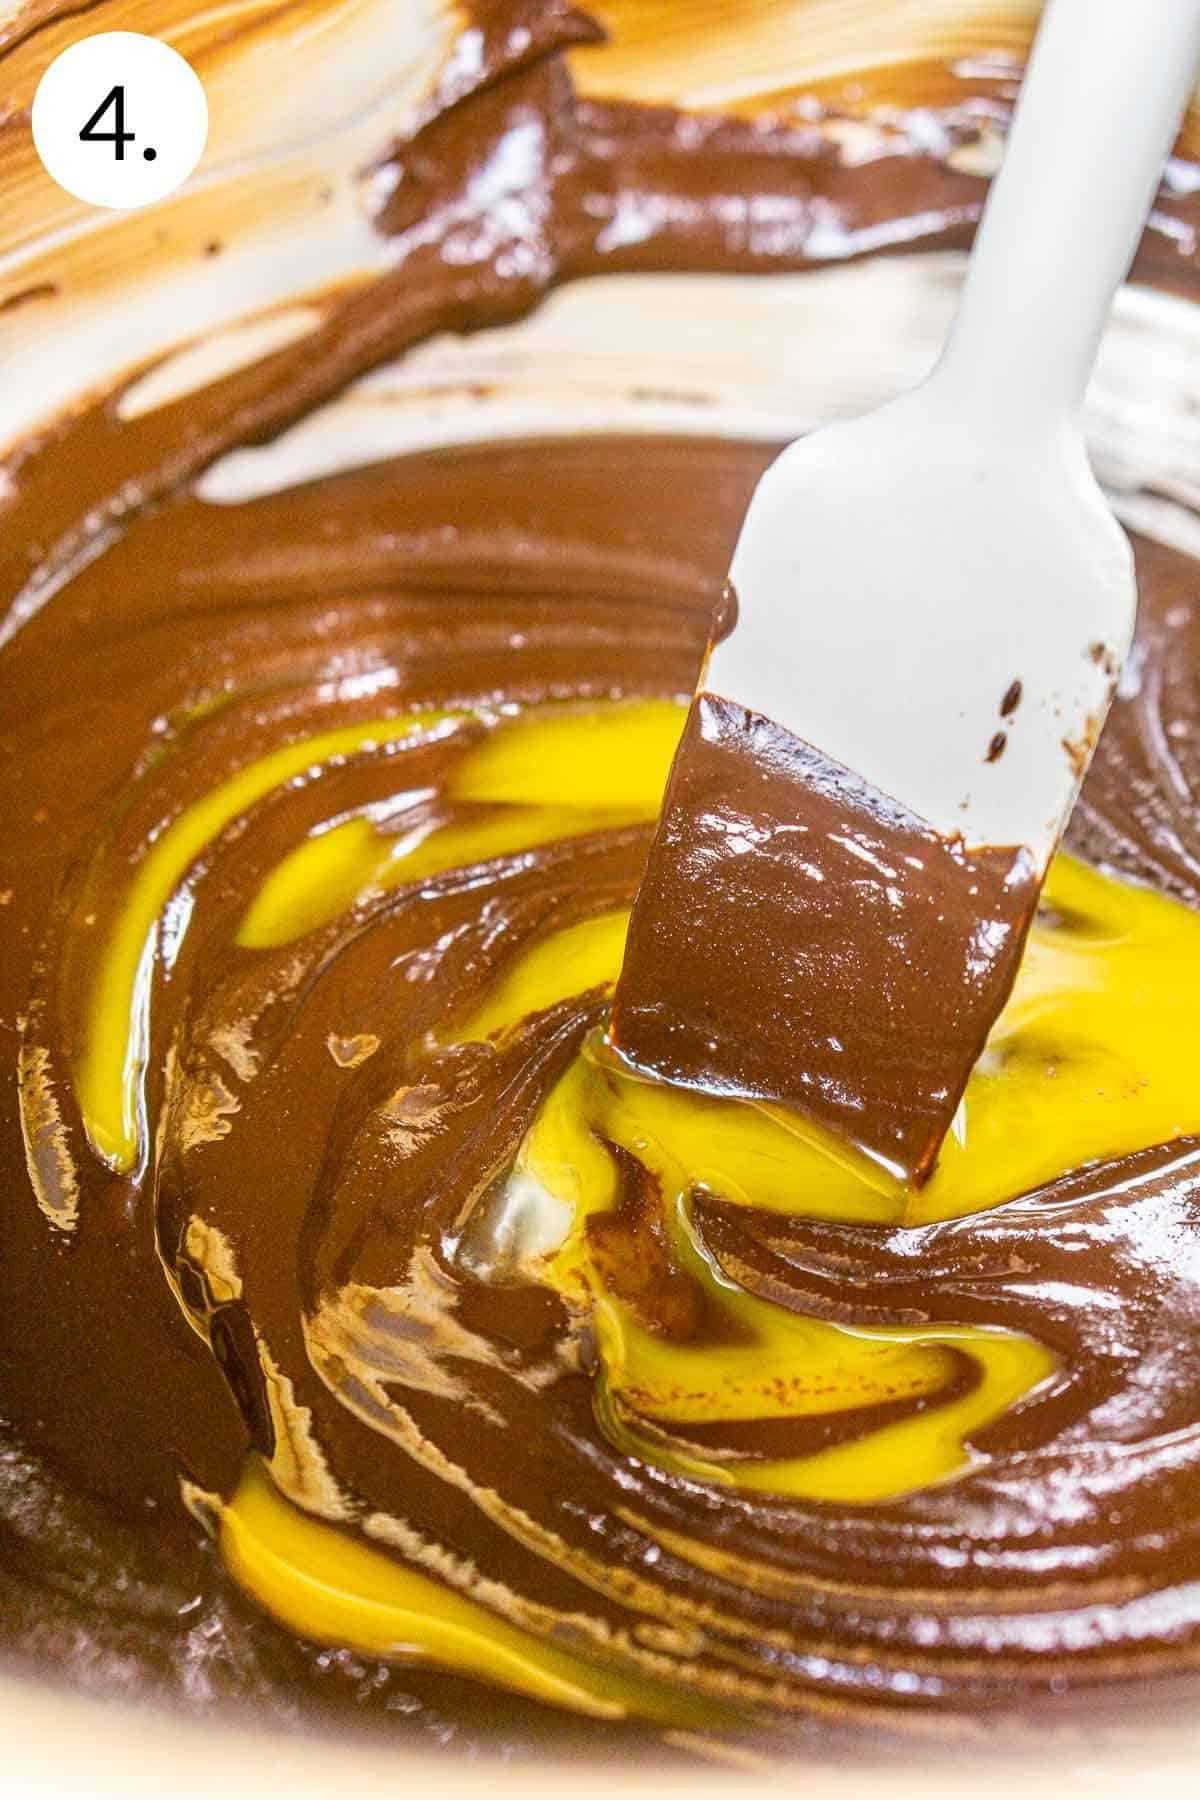 Stirring in the egg yolk into the melted chocolate so that it incorporates smoothly.